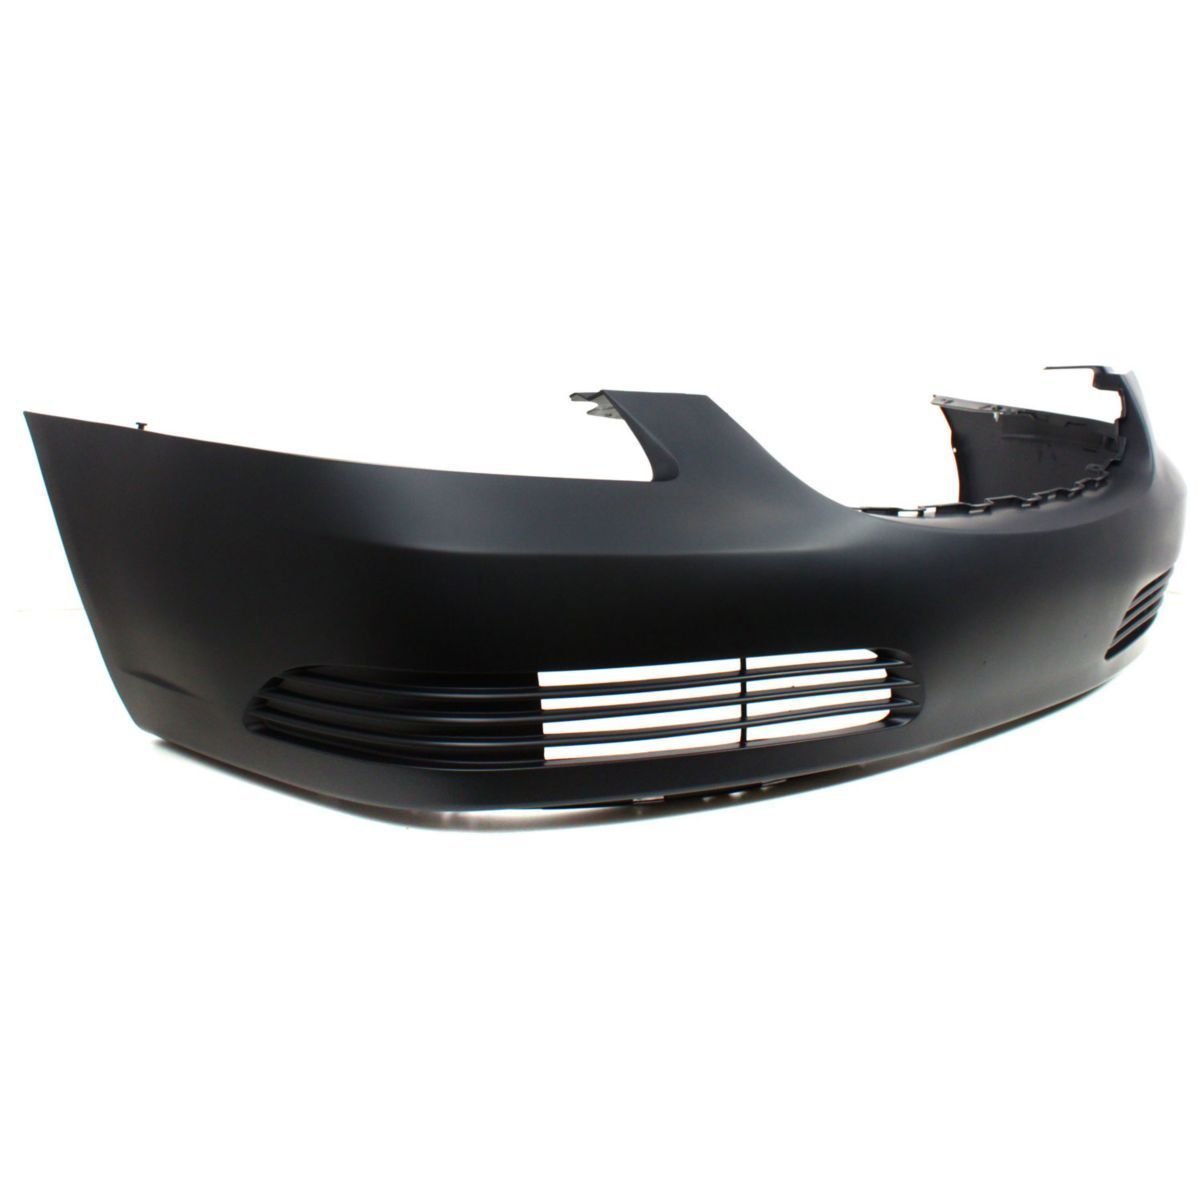 Buick Lucerne 2006 - 2011 Front Bumper Cover 06 - 11 GM1000822 - Bumper-King